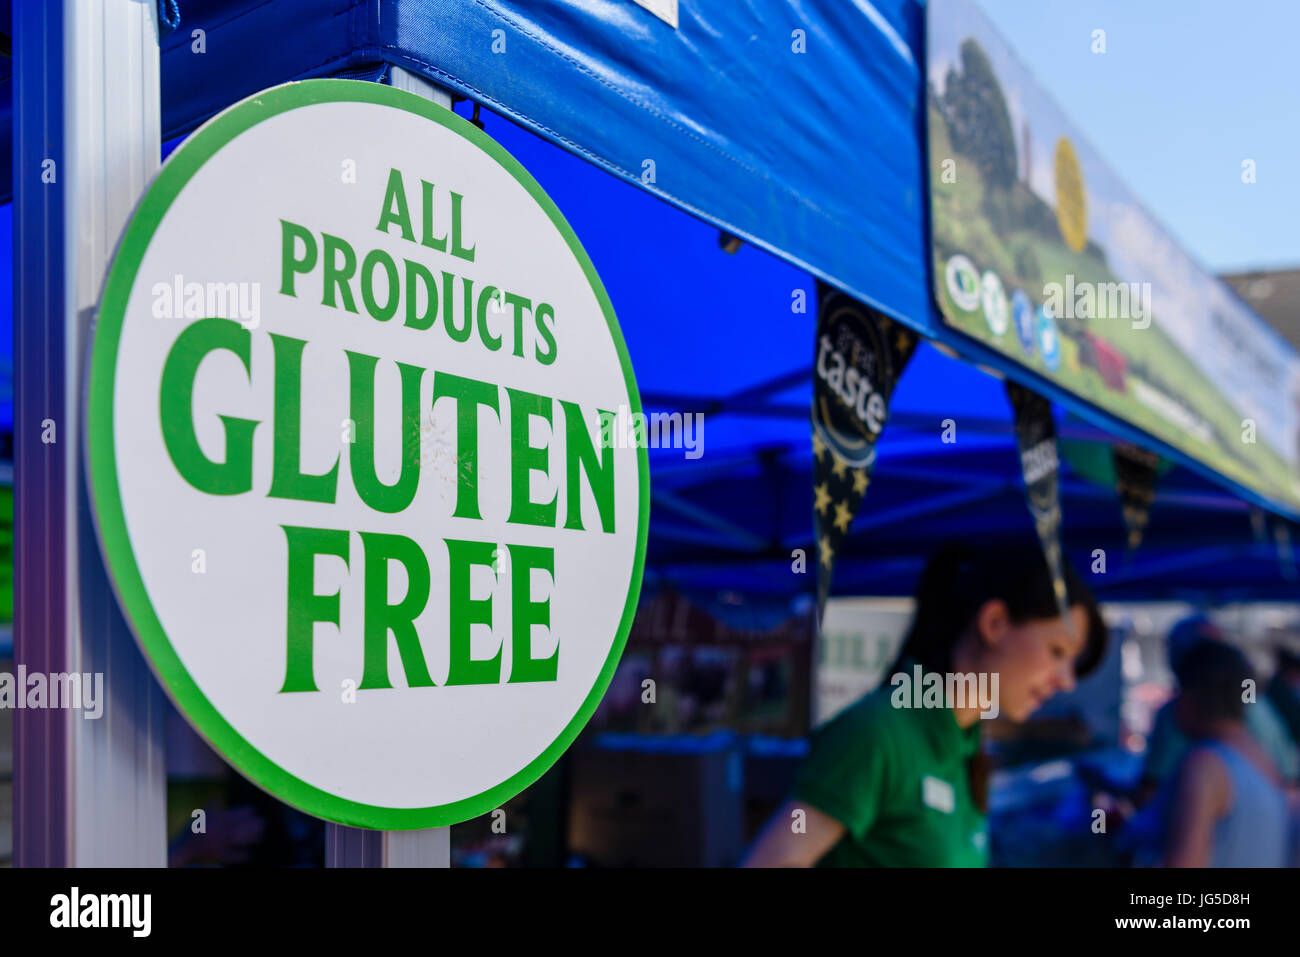 A sign at a market stall advising customers that all their products are Gluten Free Stock Photo